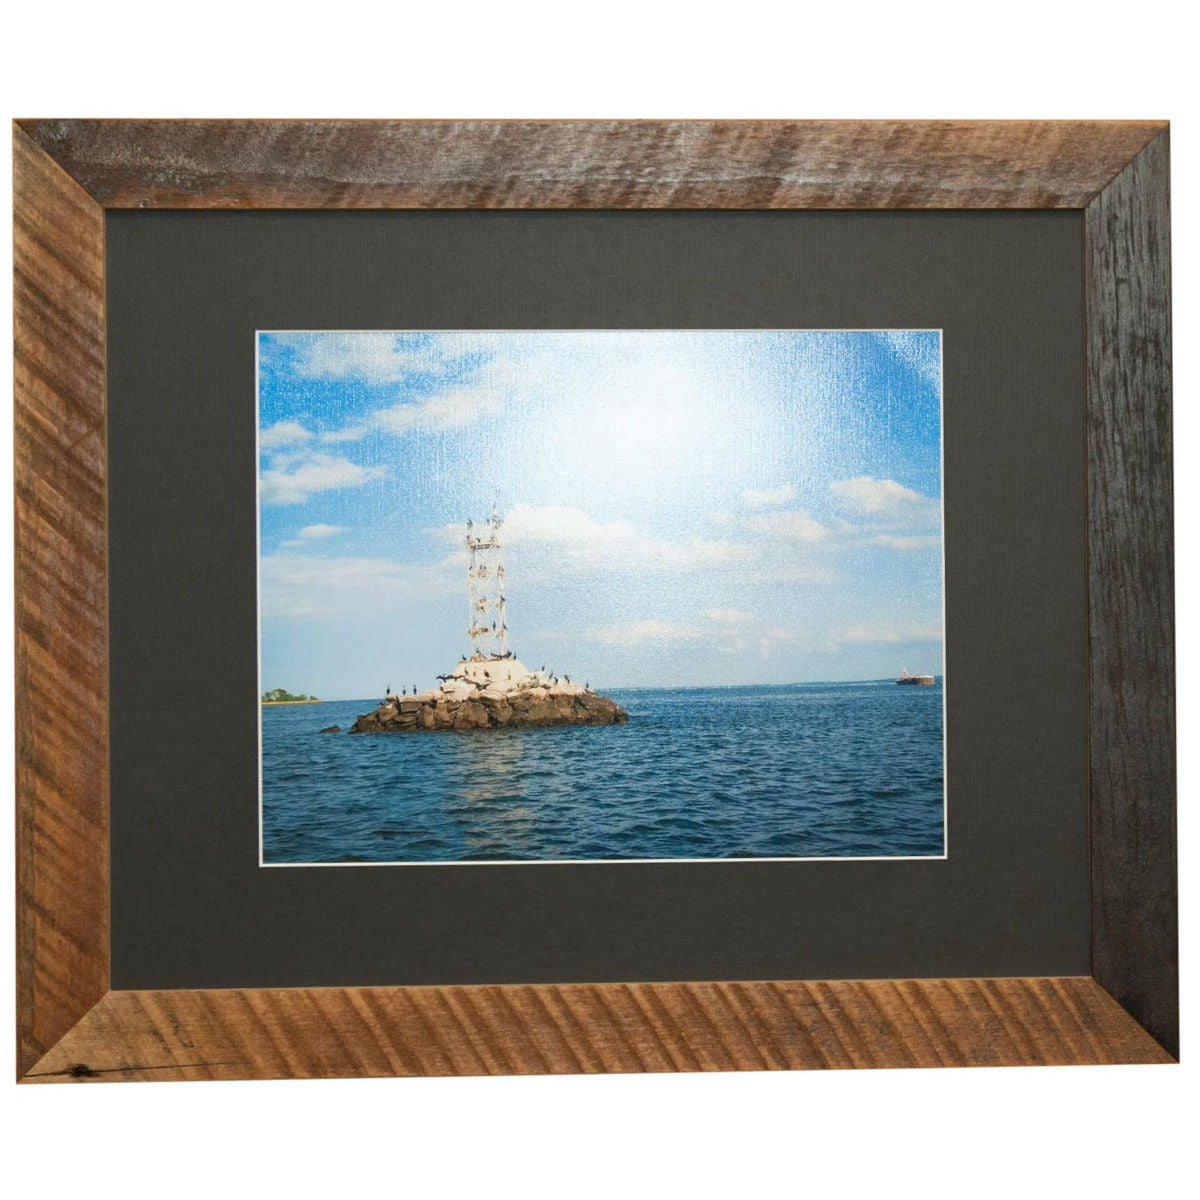 Heritage Wood Frame 16x20 Matted To 8x10 In Dark Natural